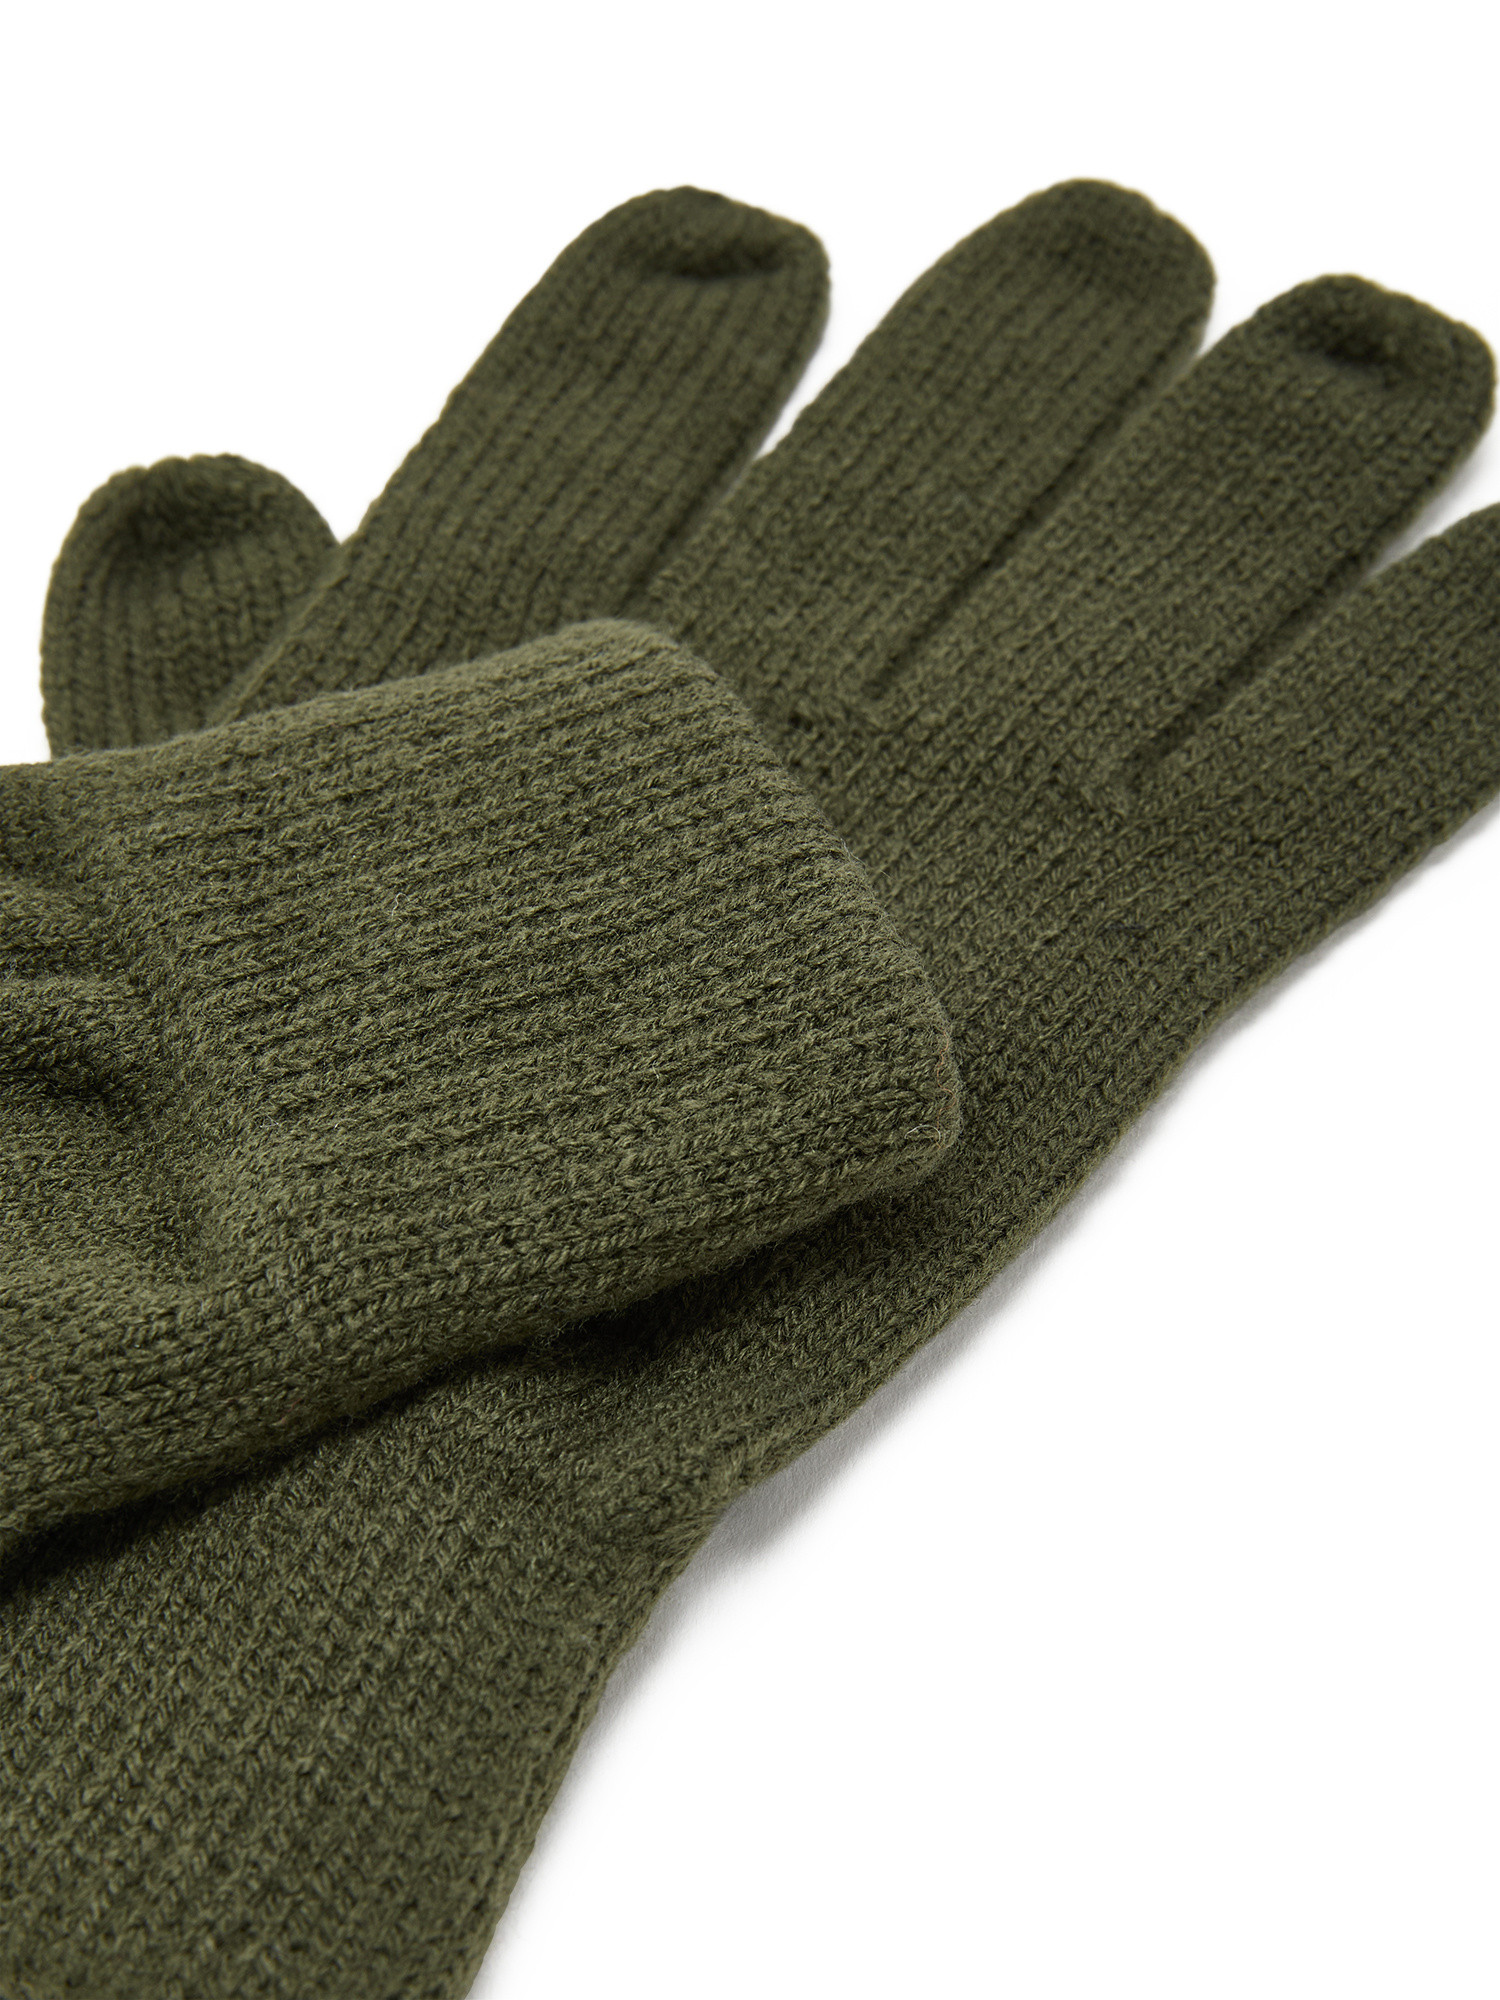 Luca D'Altieri - Basic knitted gloves, Olive Green, large image number 1